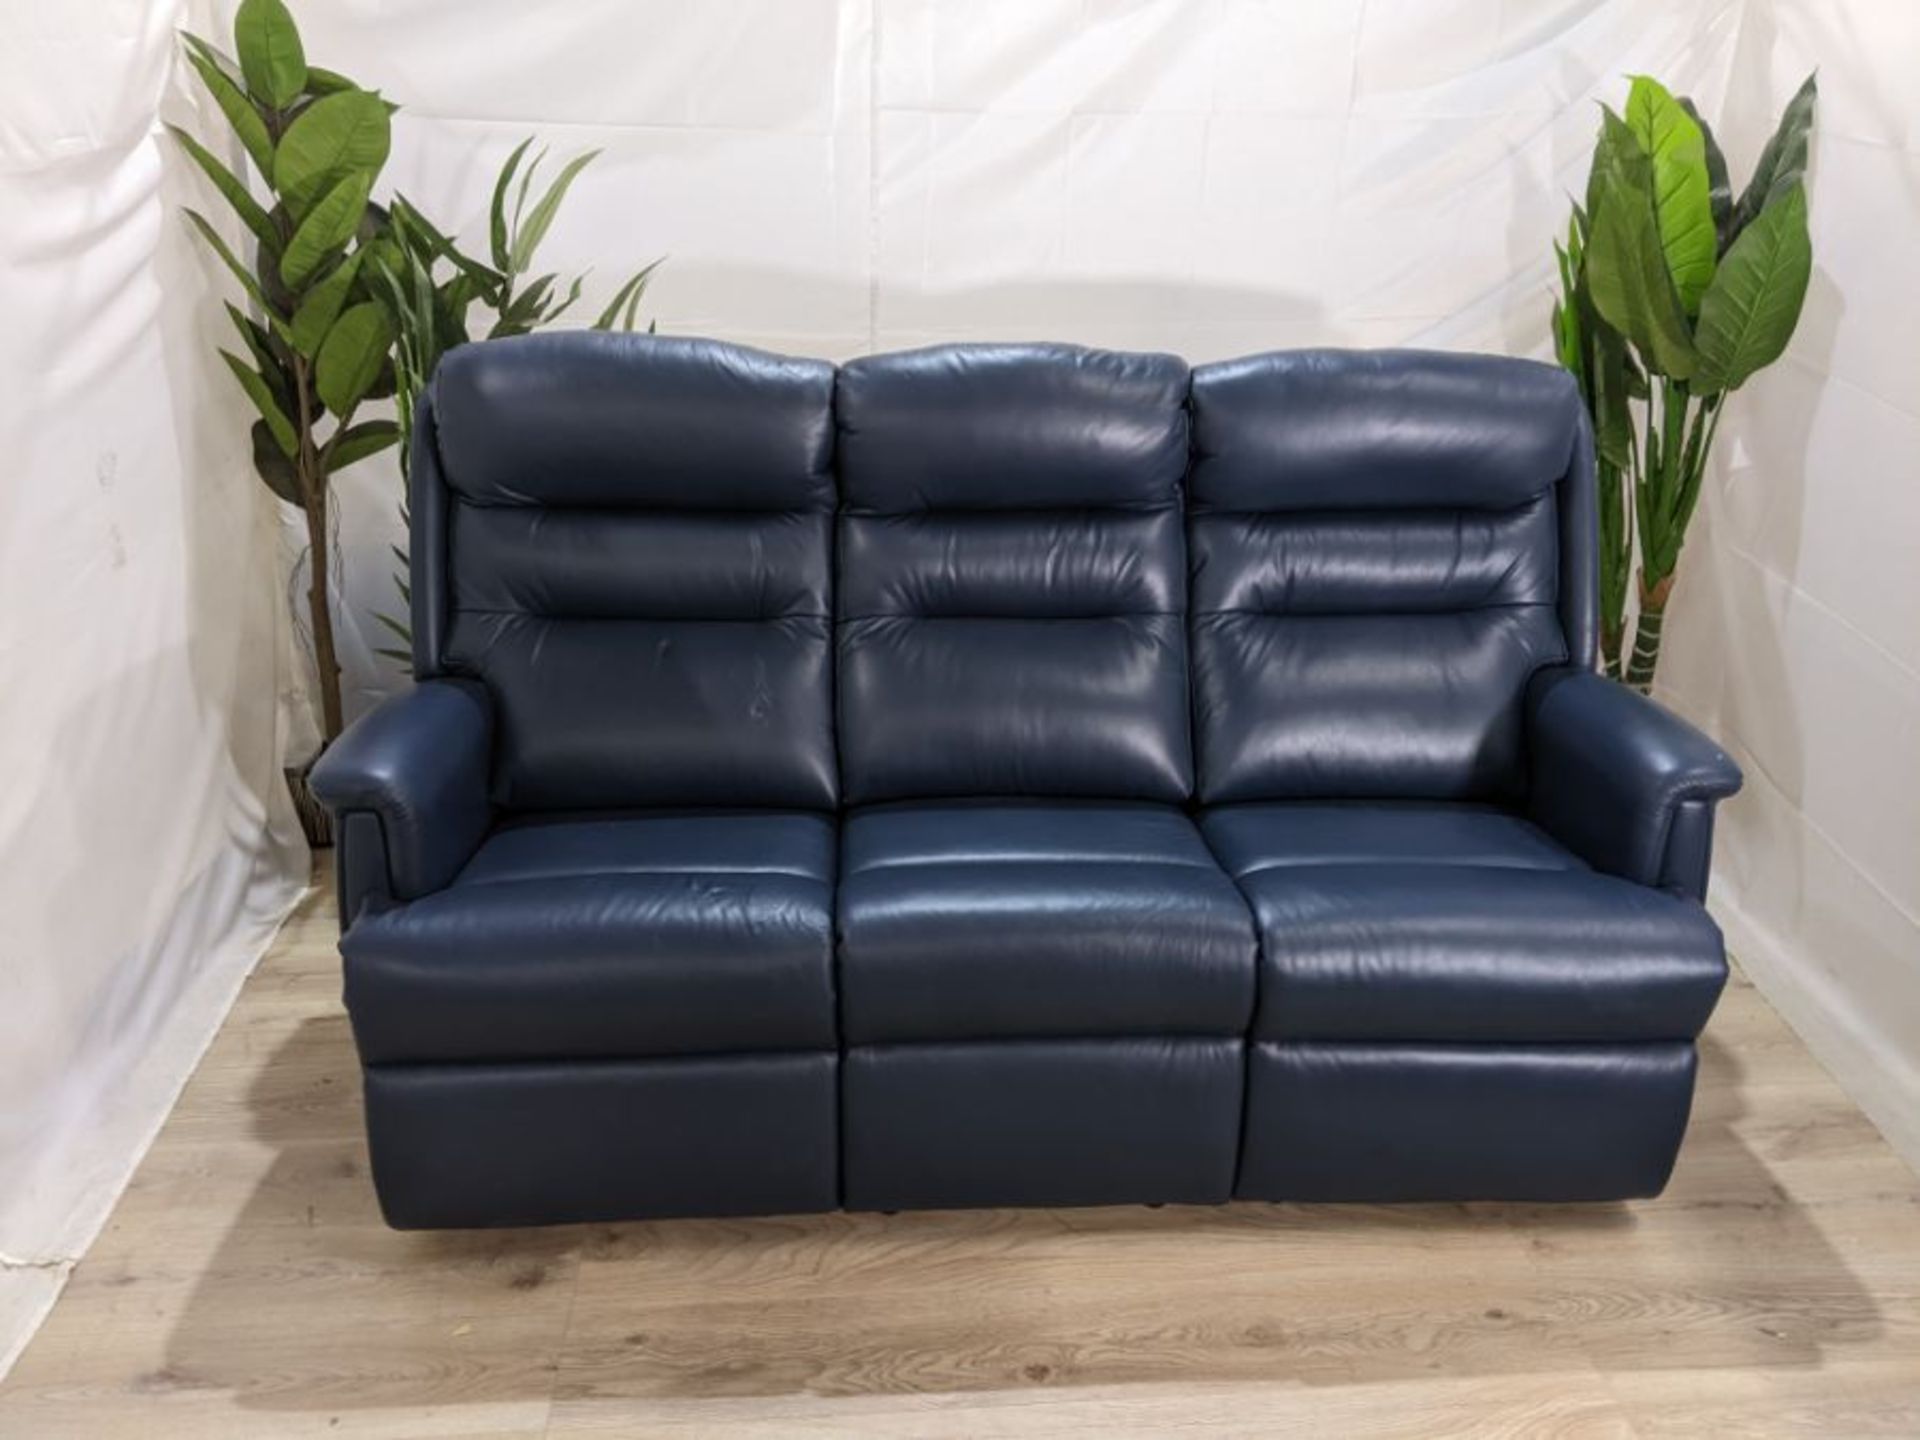 HSL Ripley 3 Seater Dual Power Recliner in Vermont Oriental Leather RRP £4680 SKU HSL-AP-